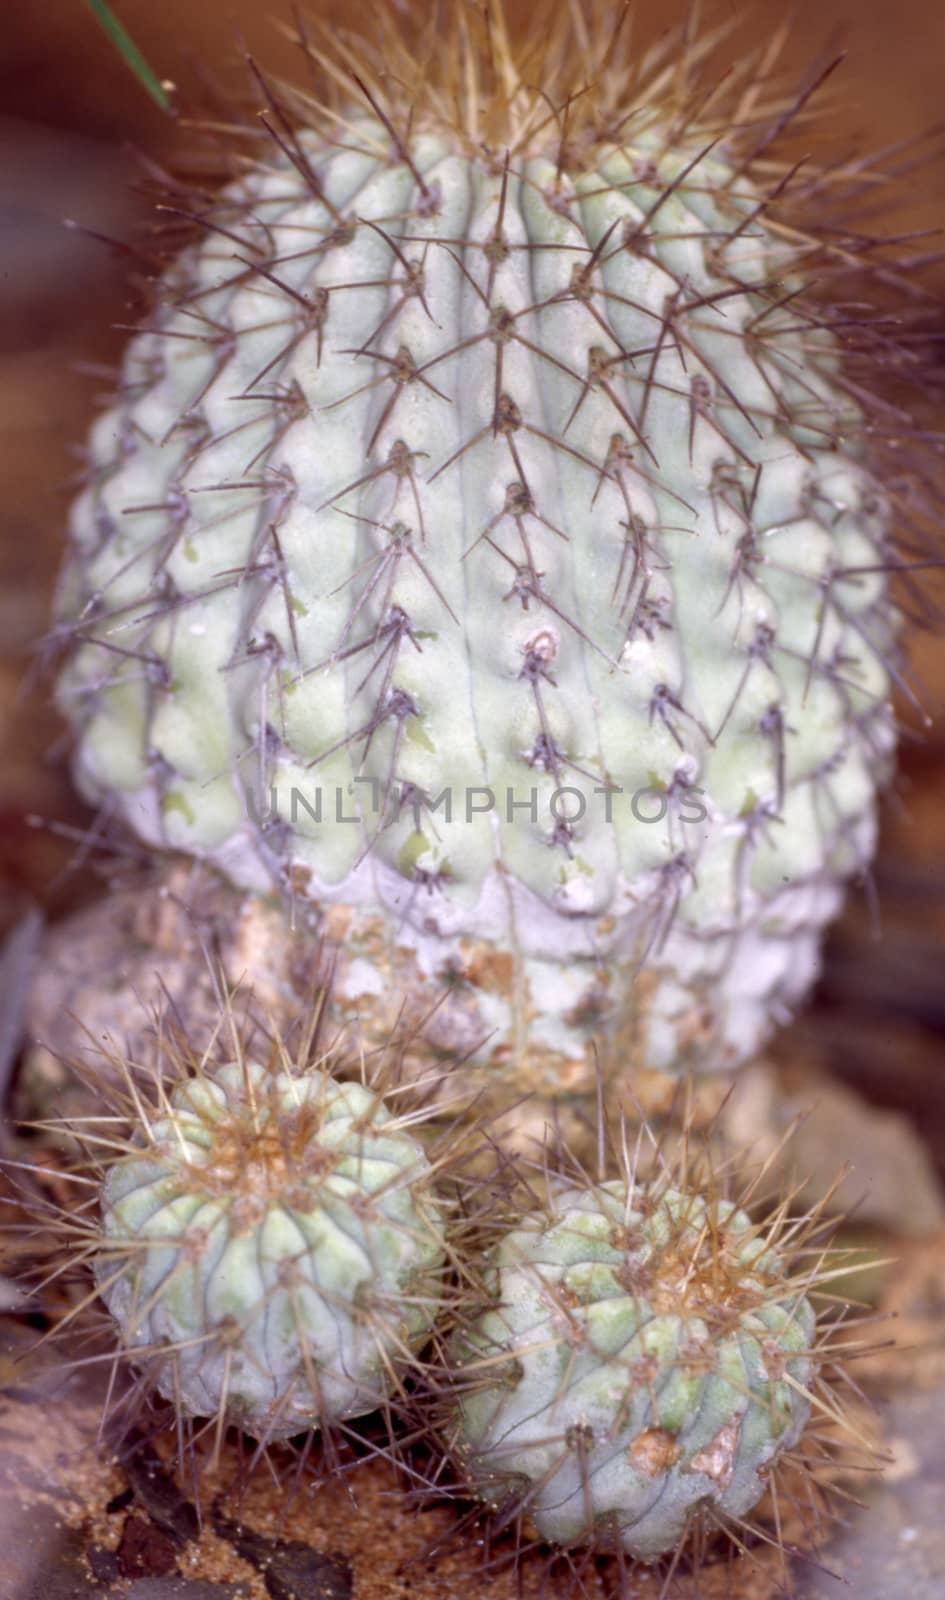 Cactus with spines close-up by Dr-Lange